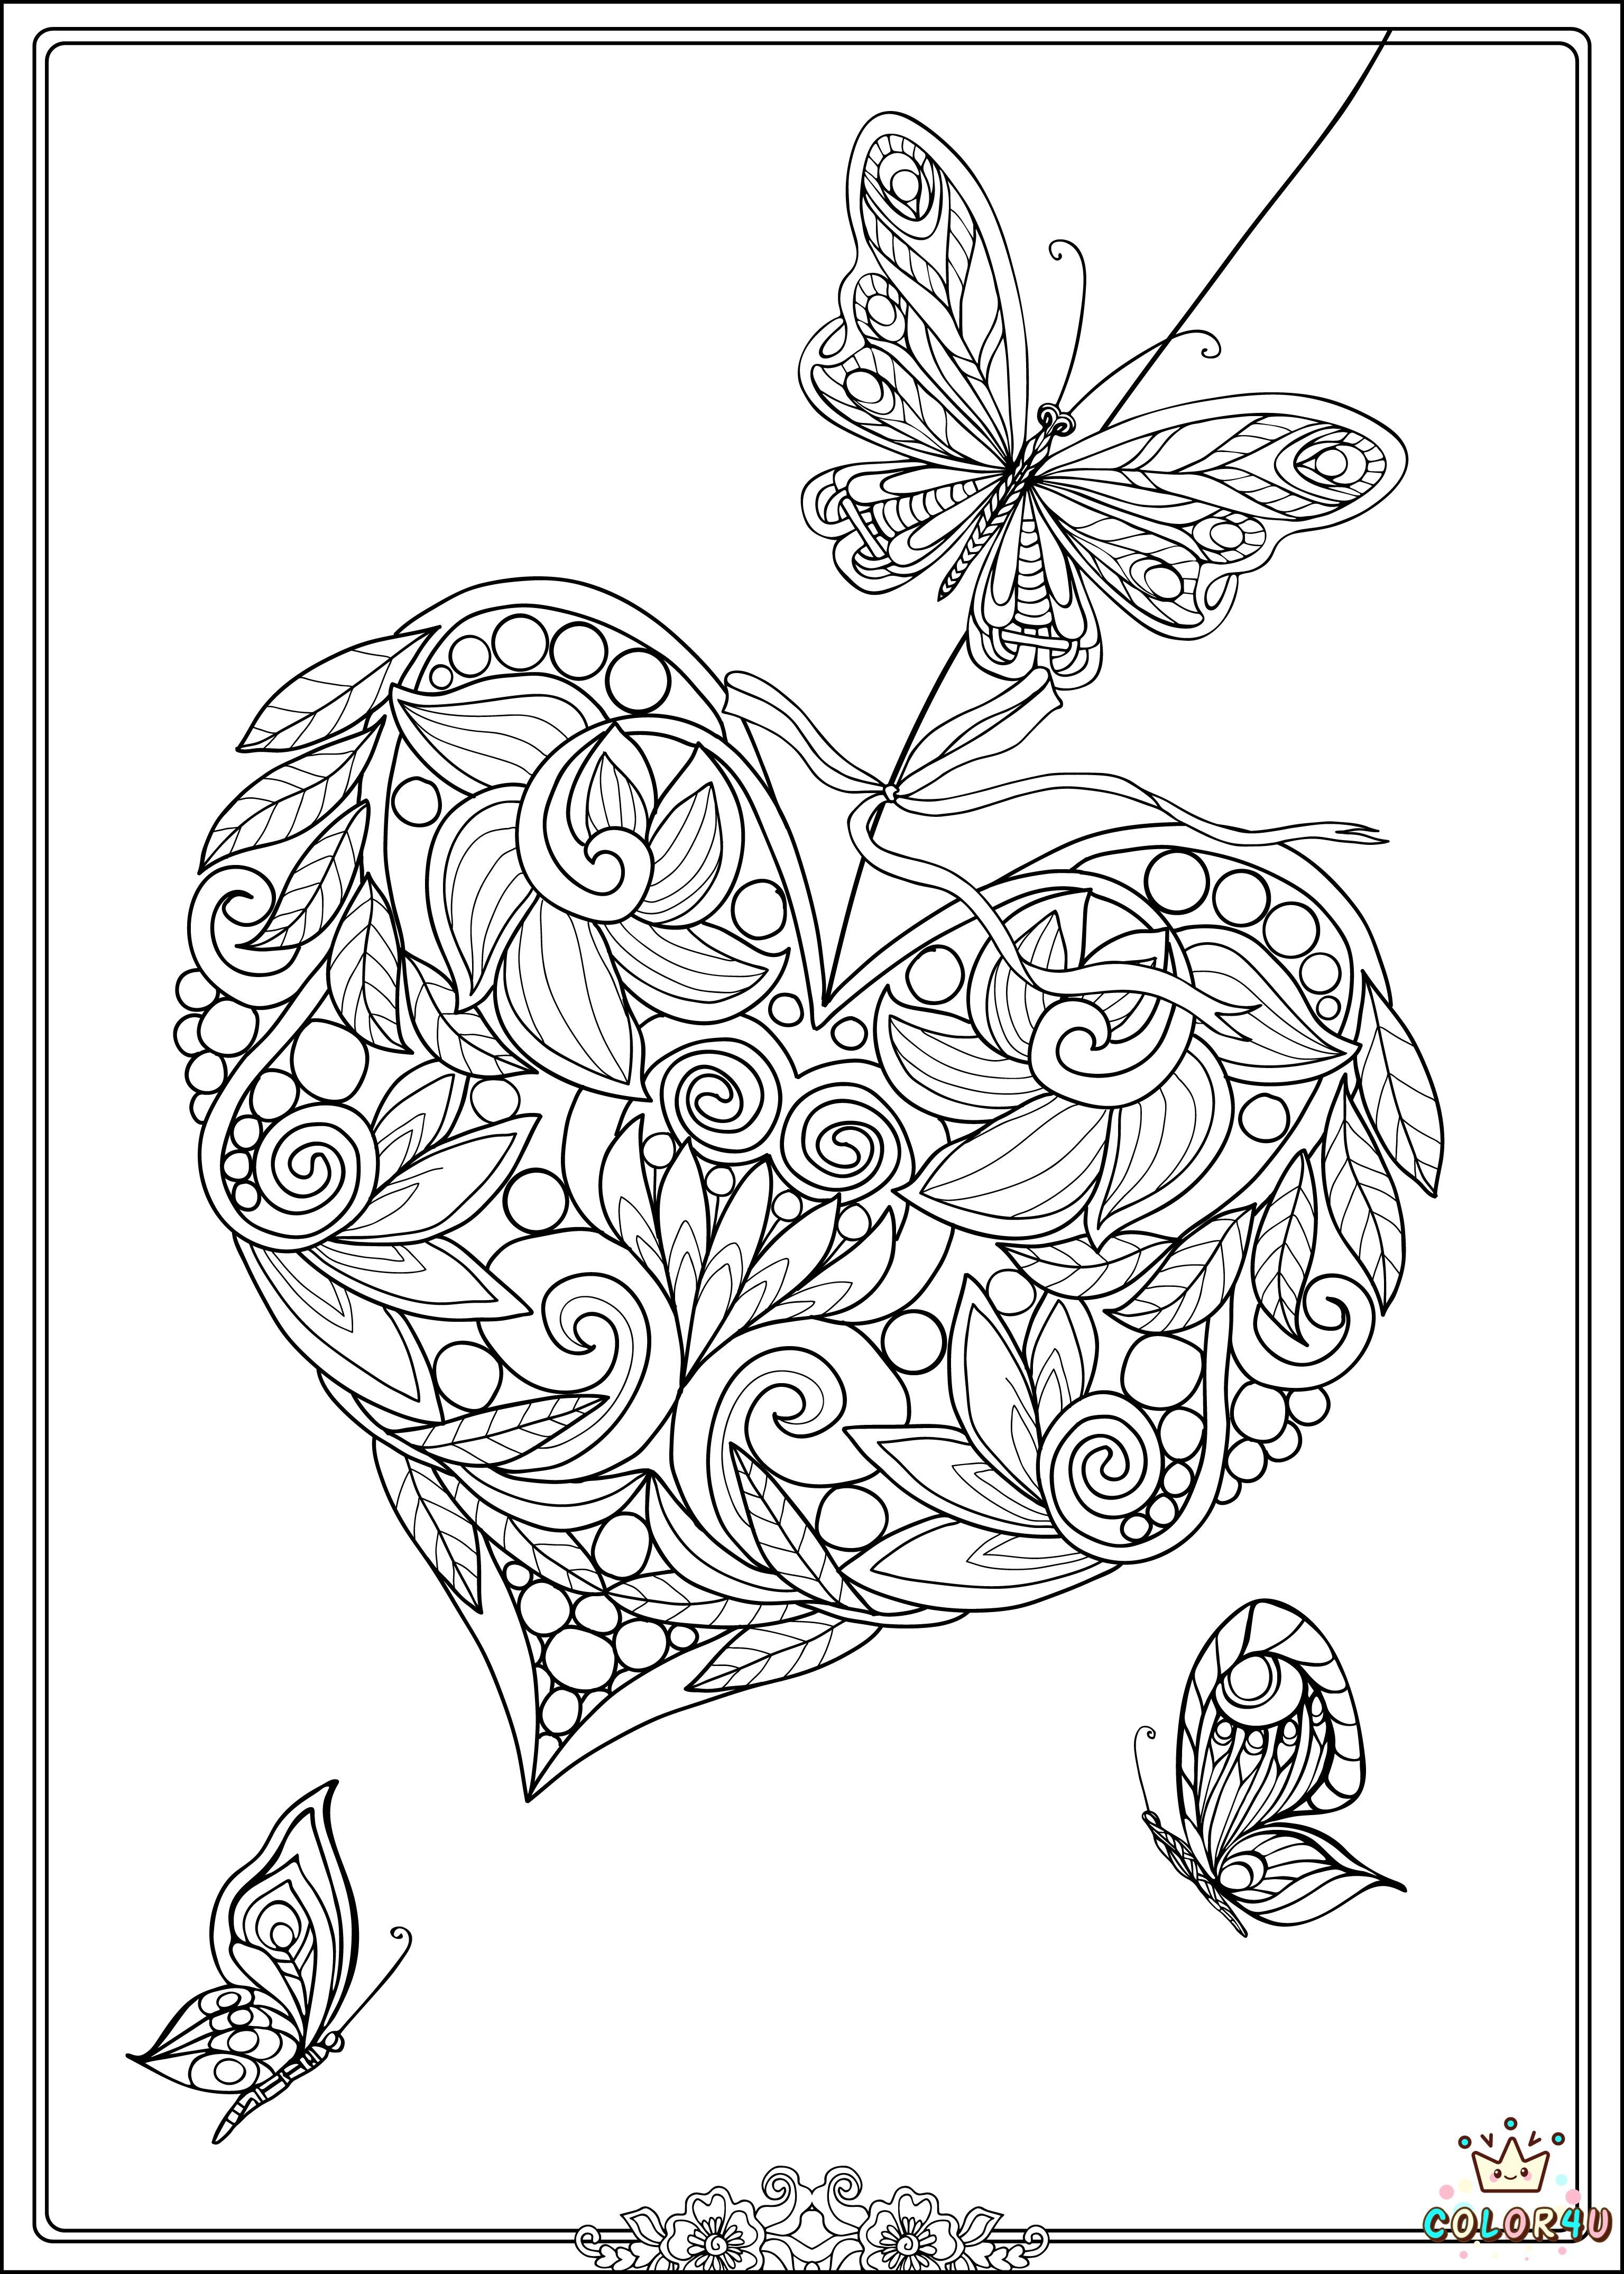 Hearts and butterflies Coloring Pages - BubaKids.com